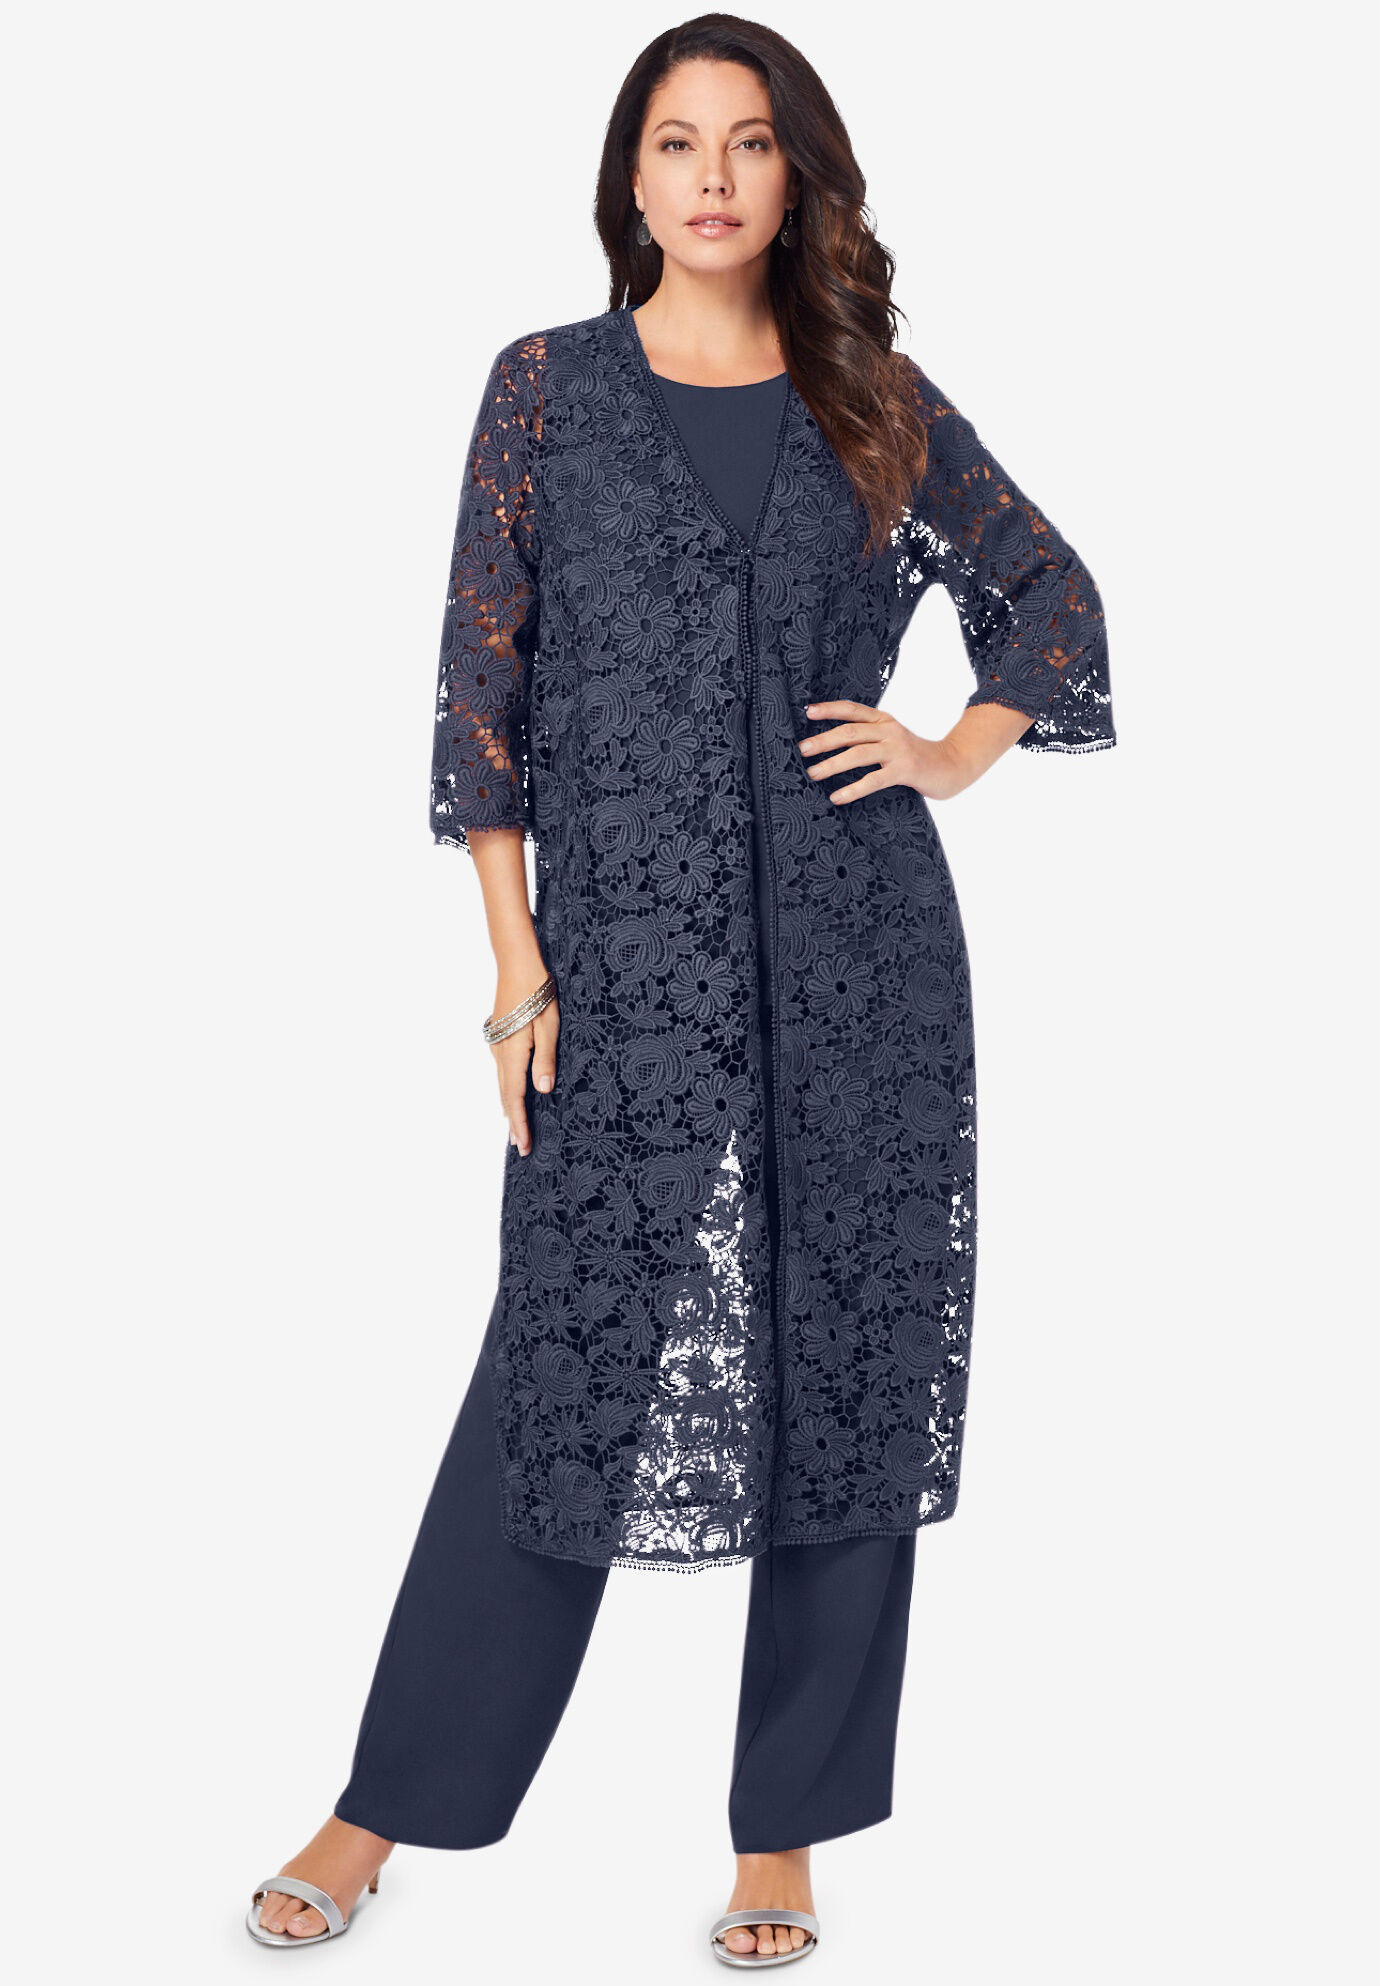 wedding guest lace dresses with sleeves